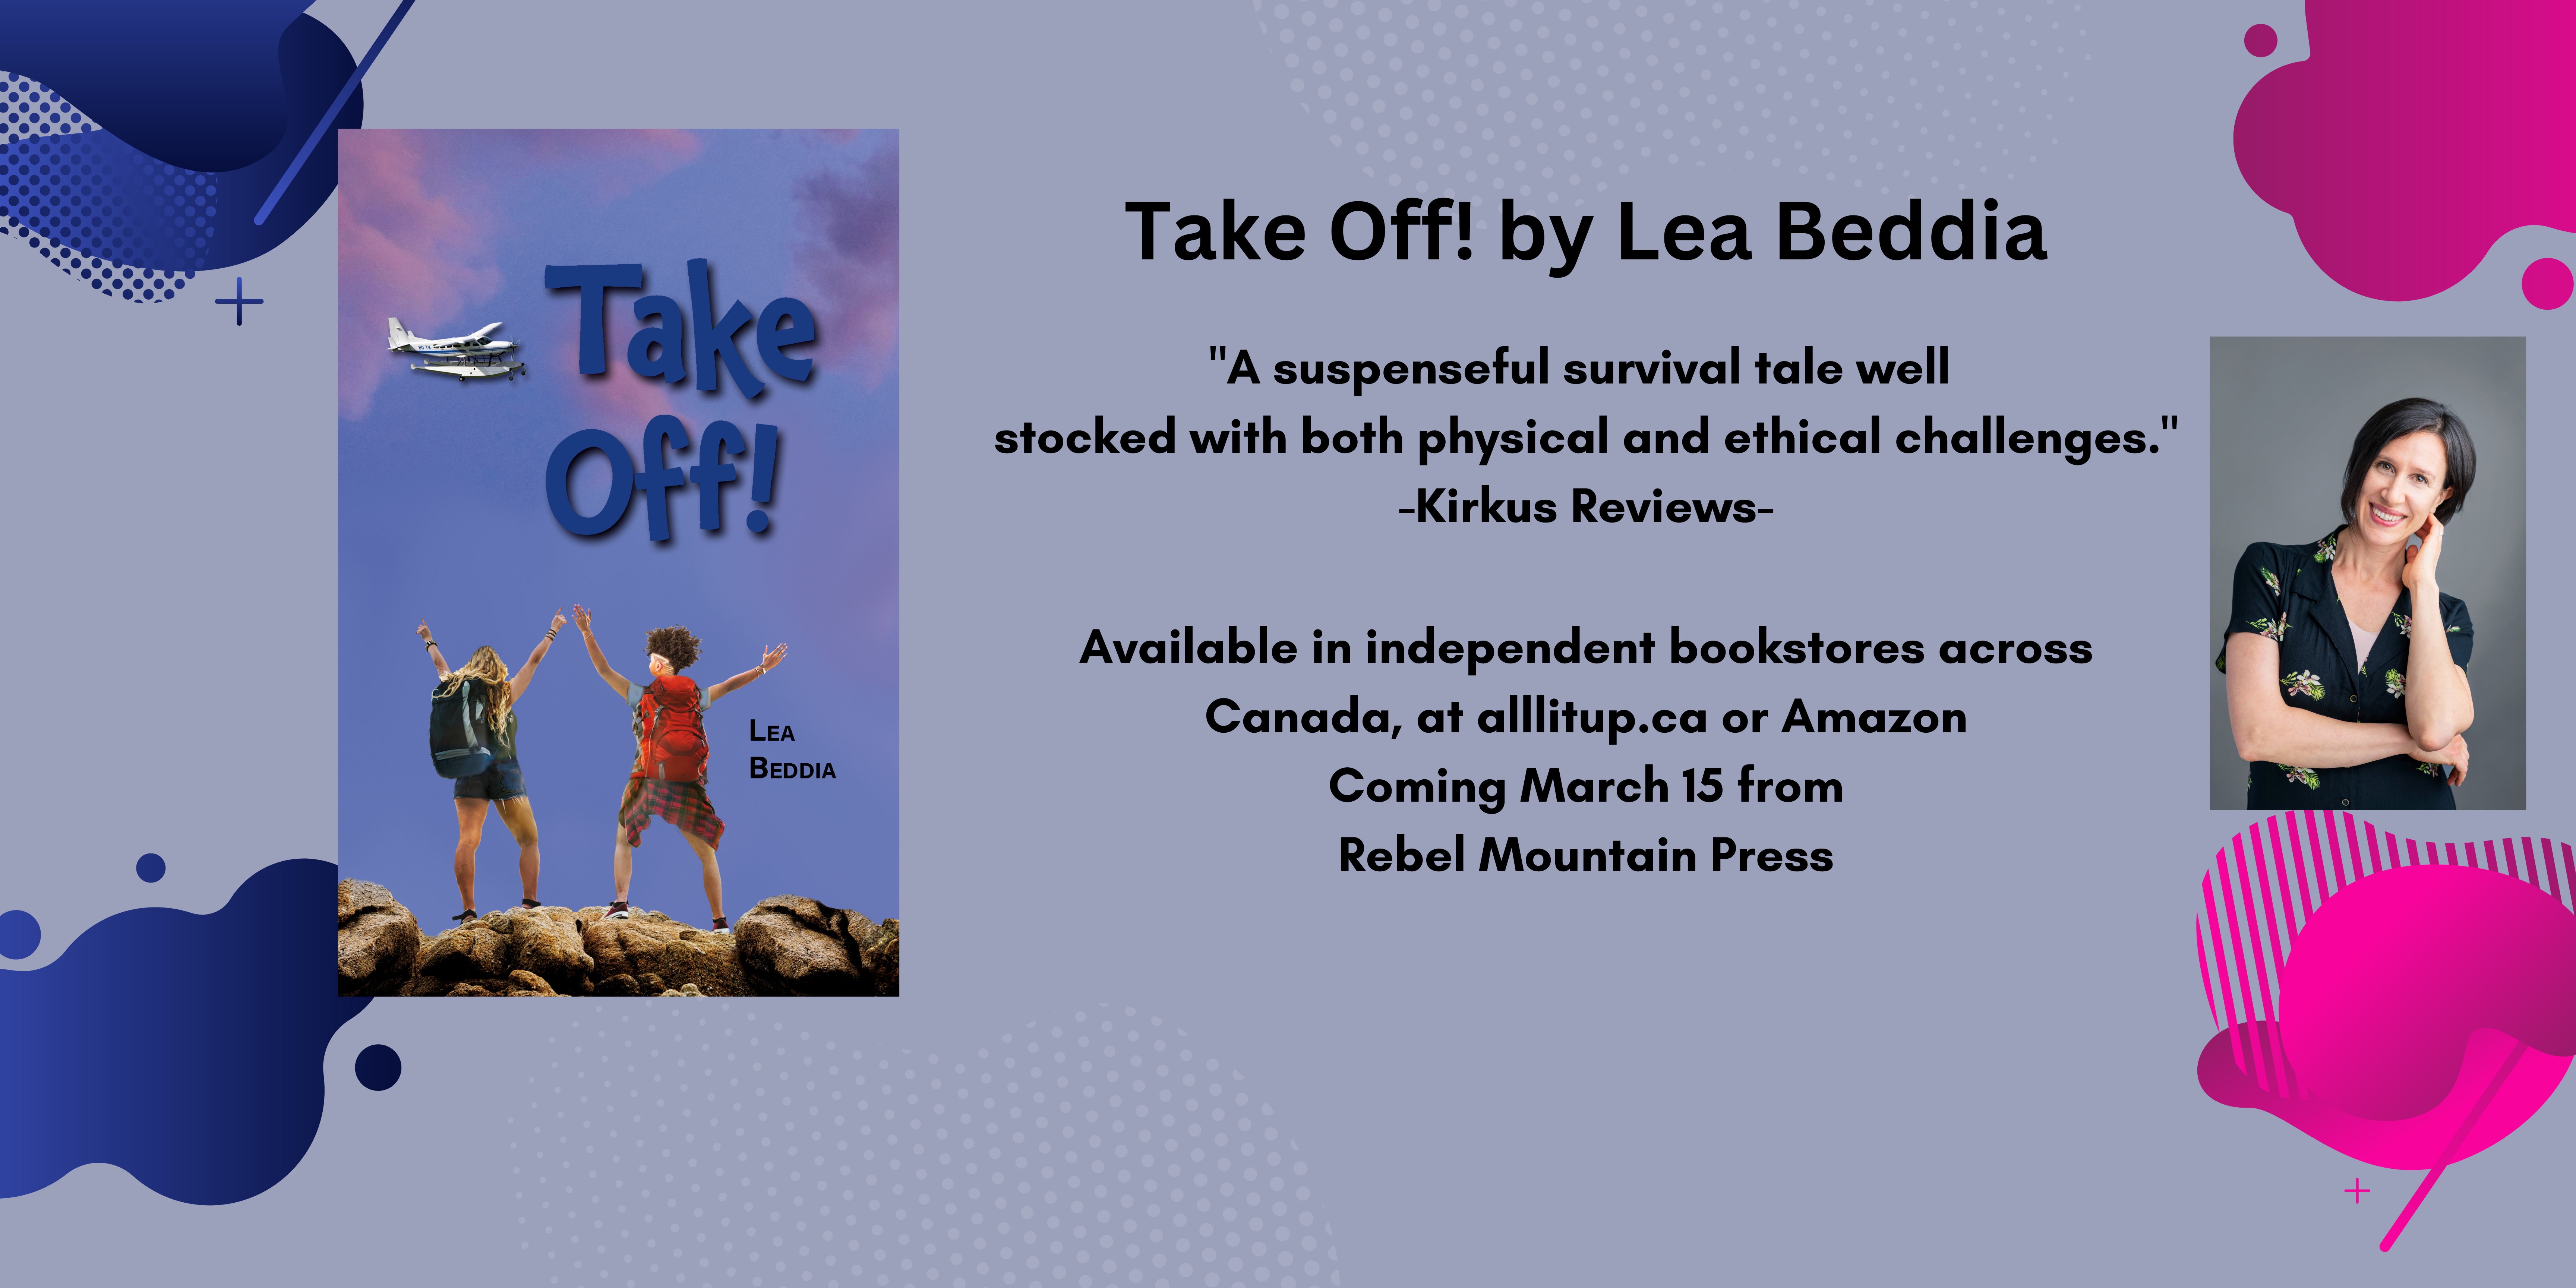 Take Off! by Lea Beddia, available March 15 from Rebel Mountain Press